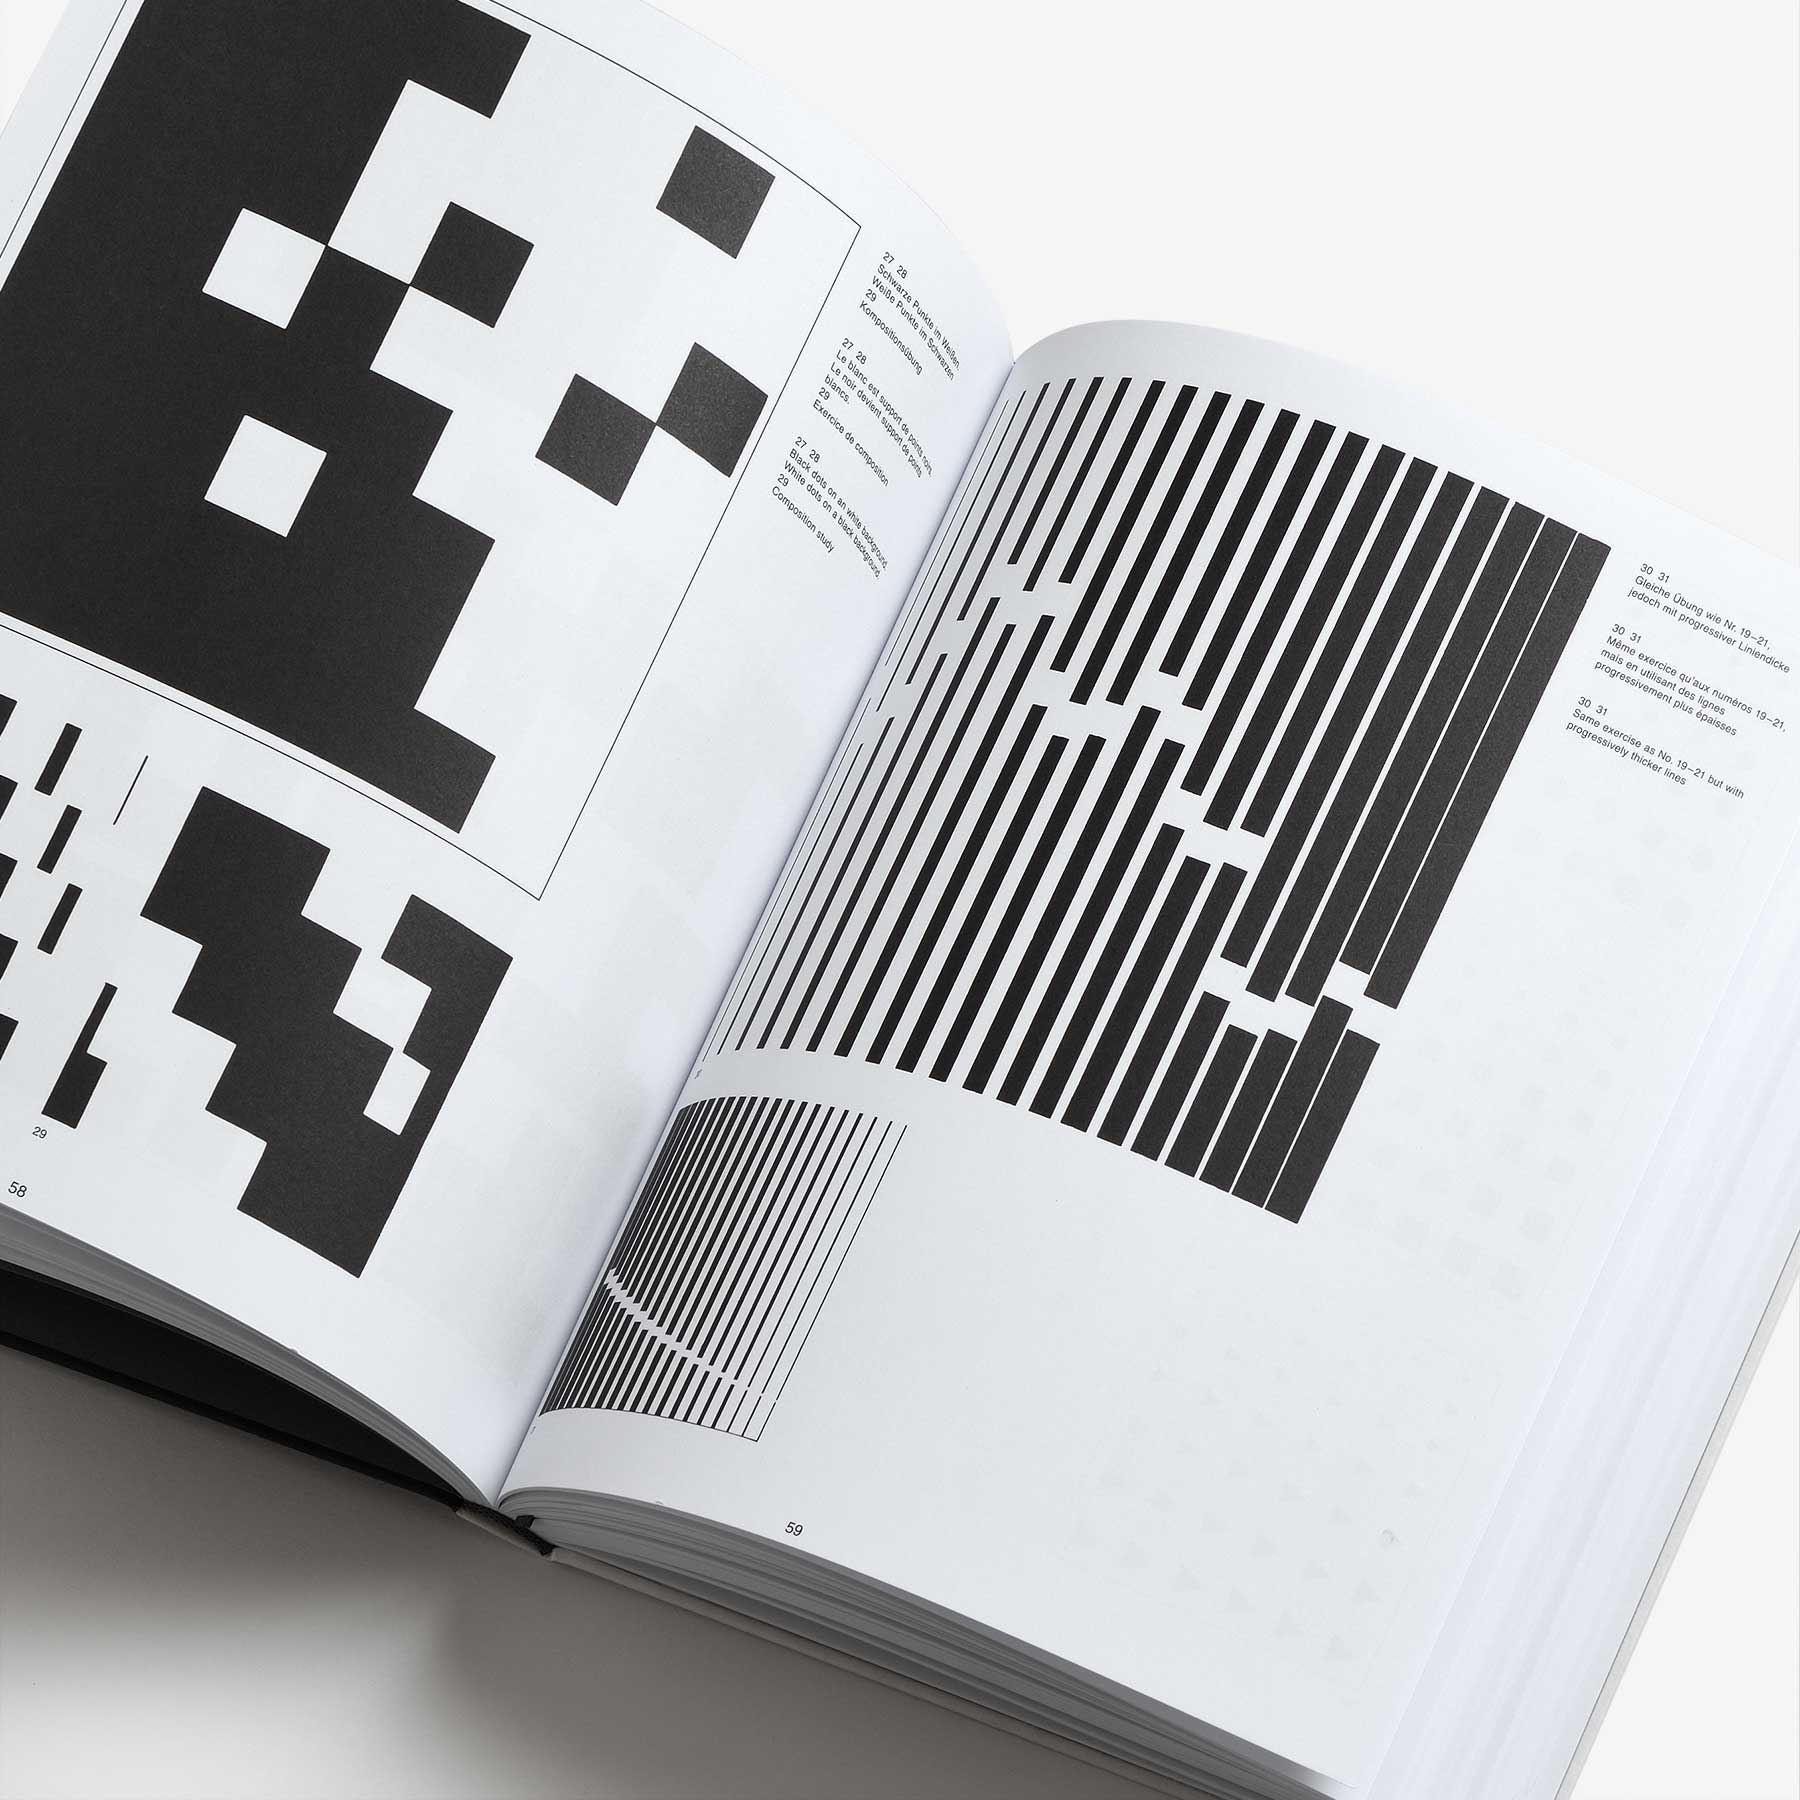 Graphic Design Manual: Principles and Practice